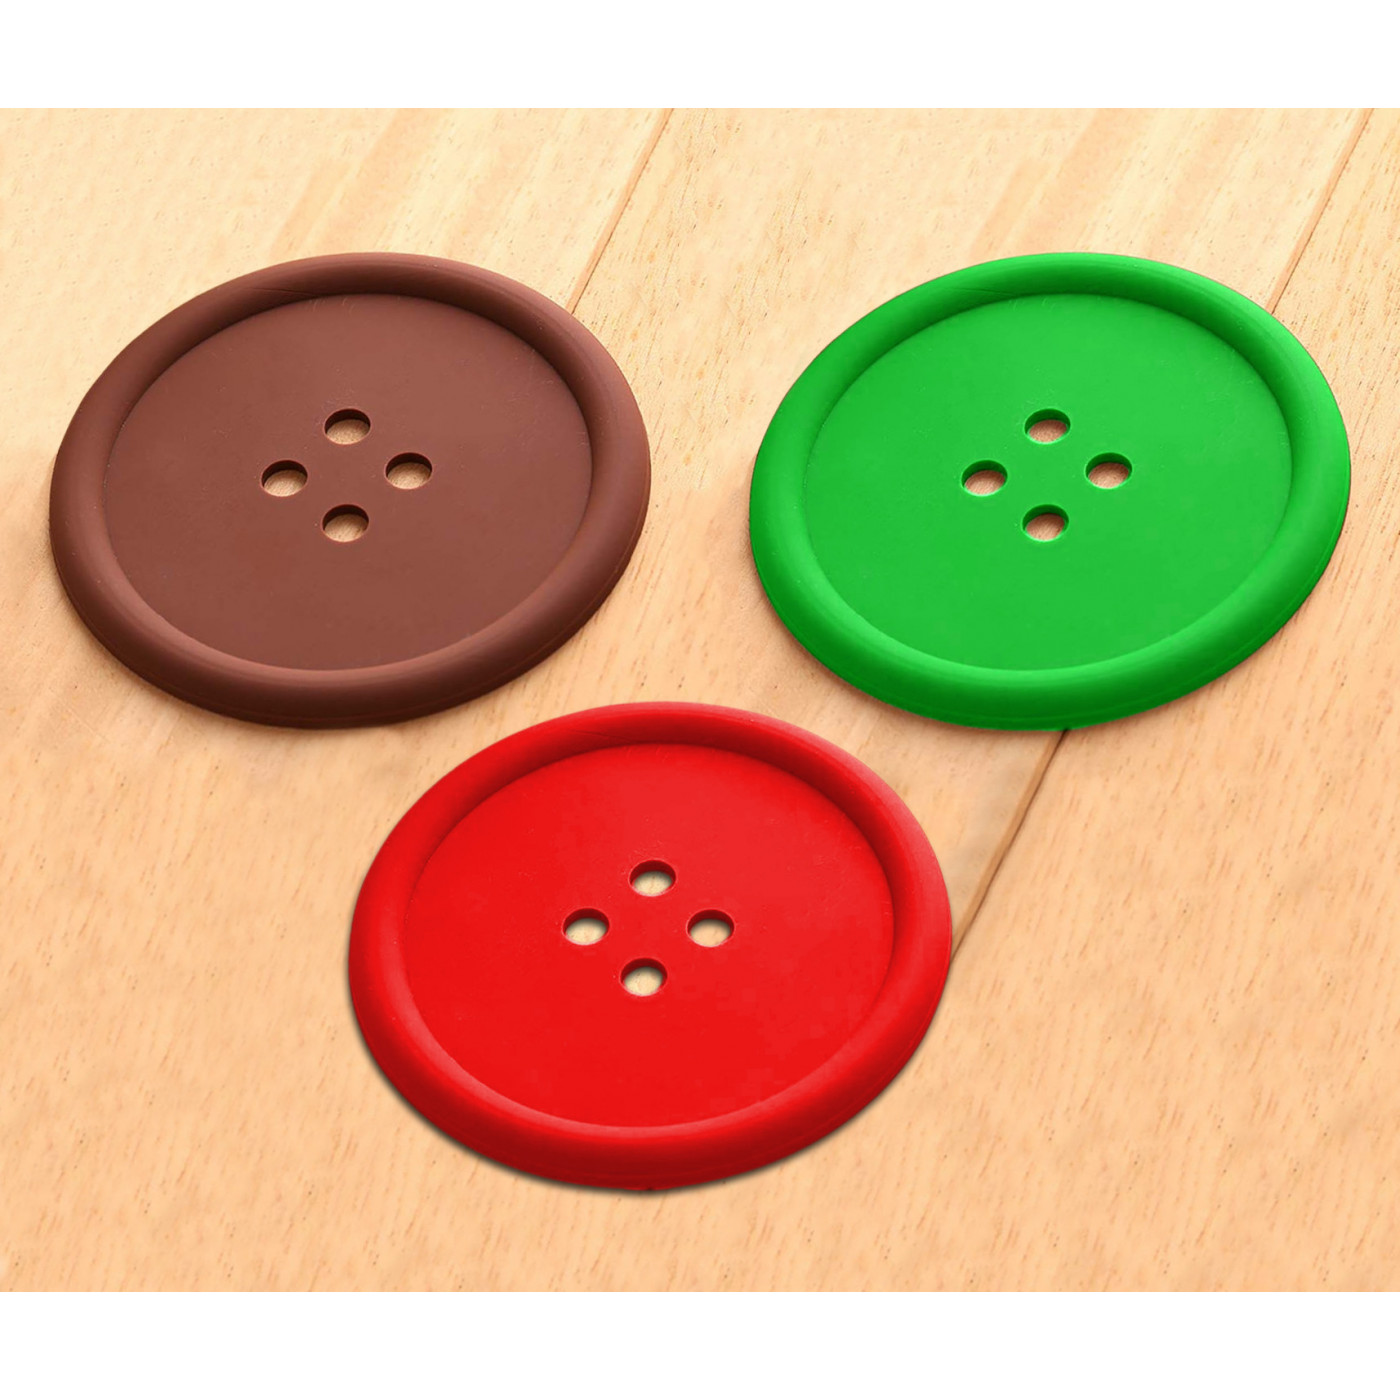 Set of 15 silicone coasters (red, green, brown)